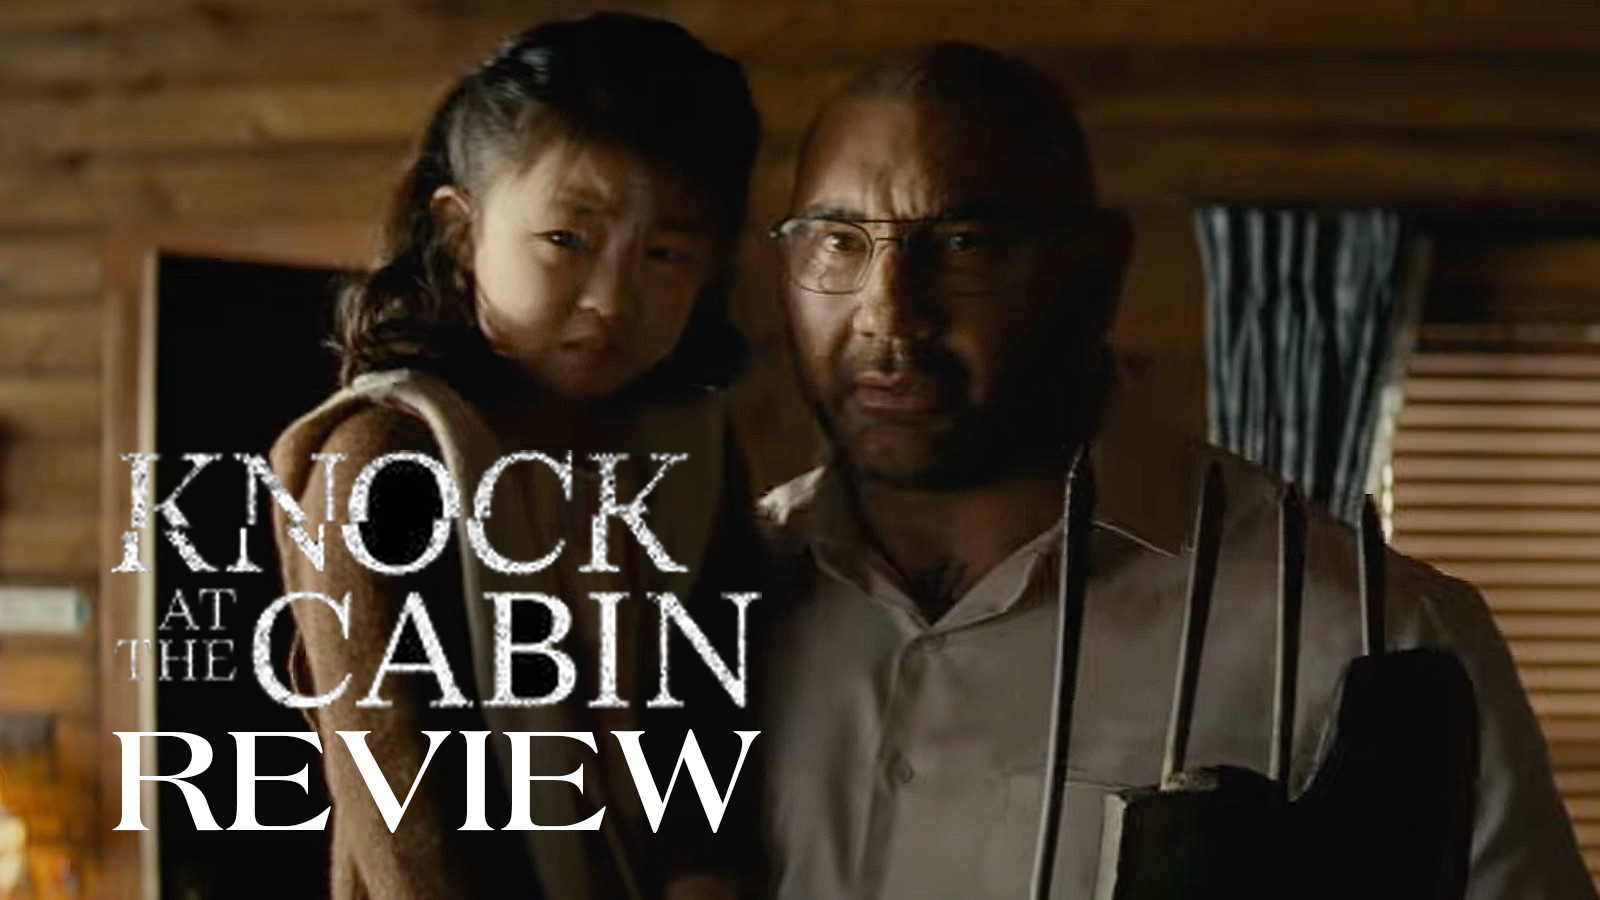 Knock at the Cabin Review – Shyamalan’s New Film Recreates Annoyance of Unwanted Solicitors